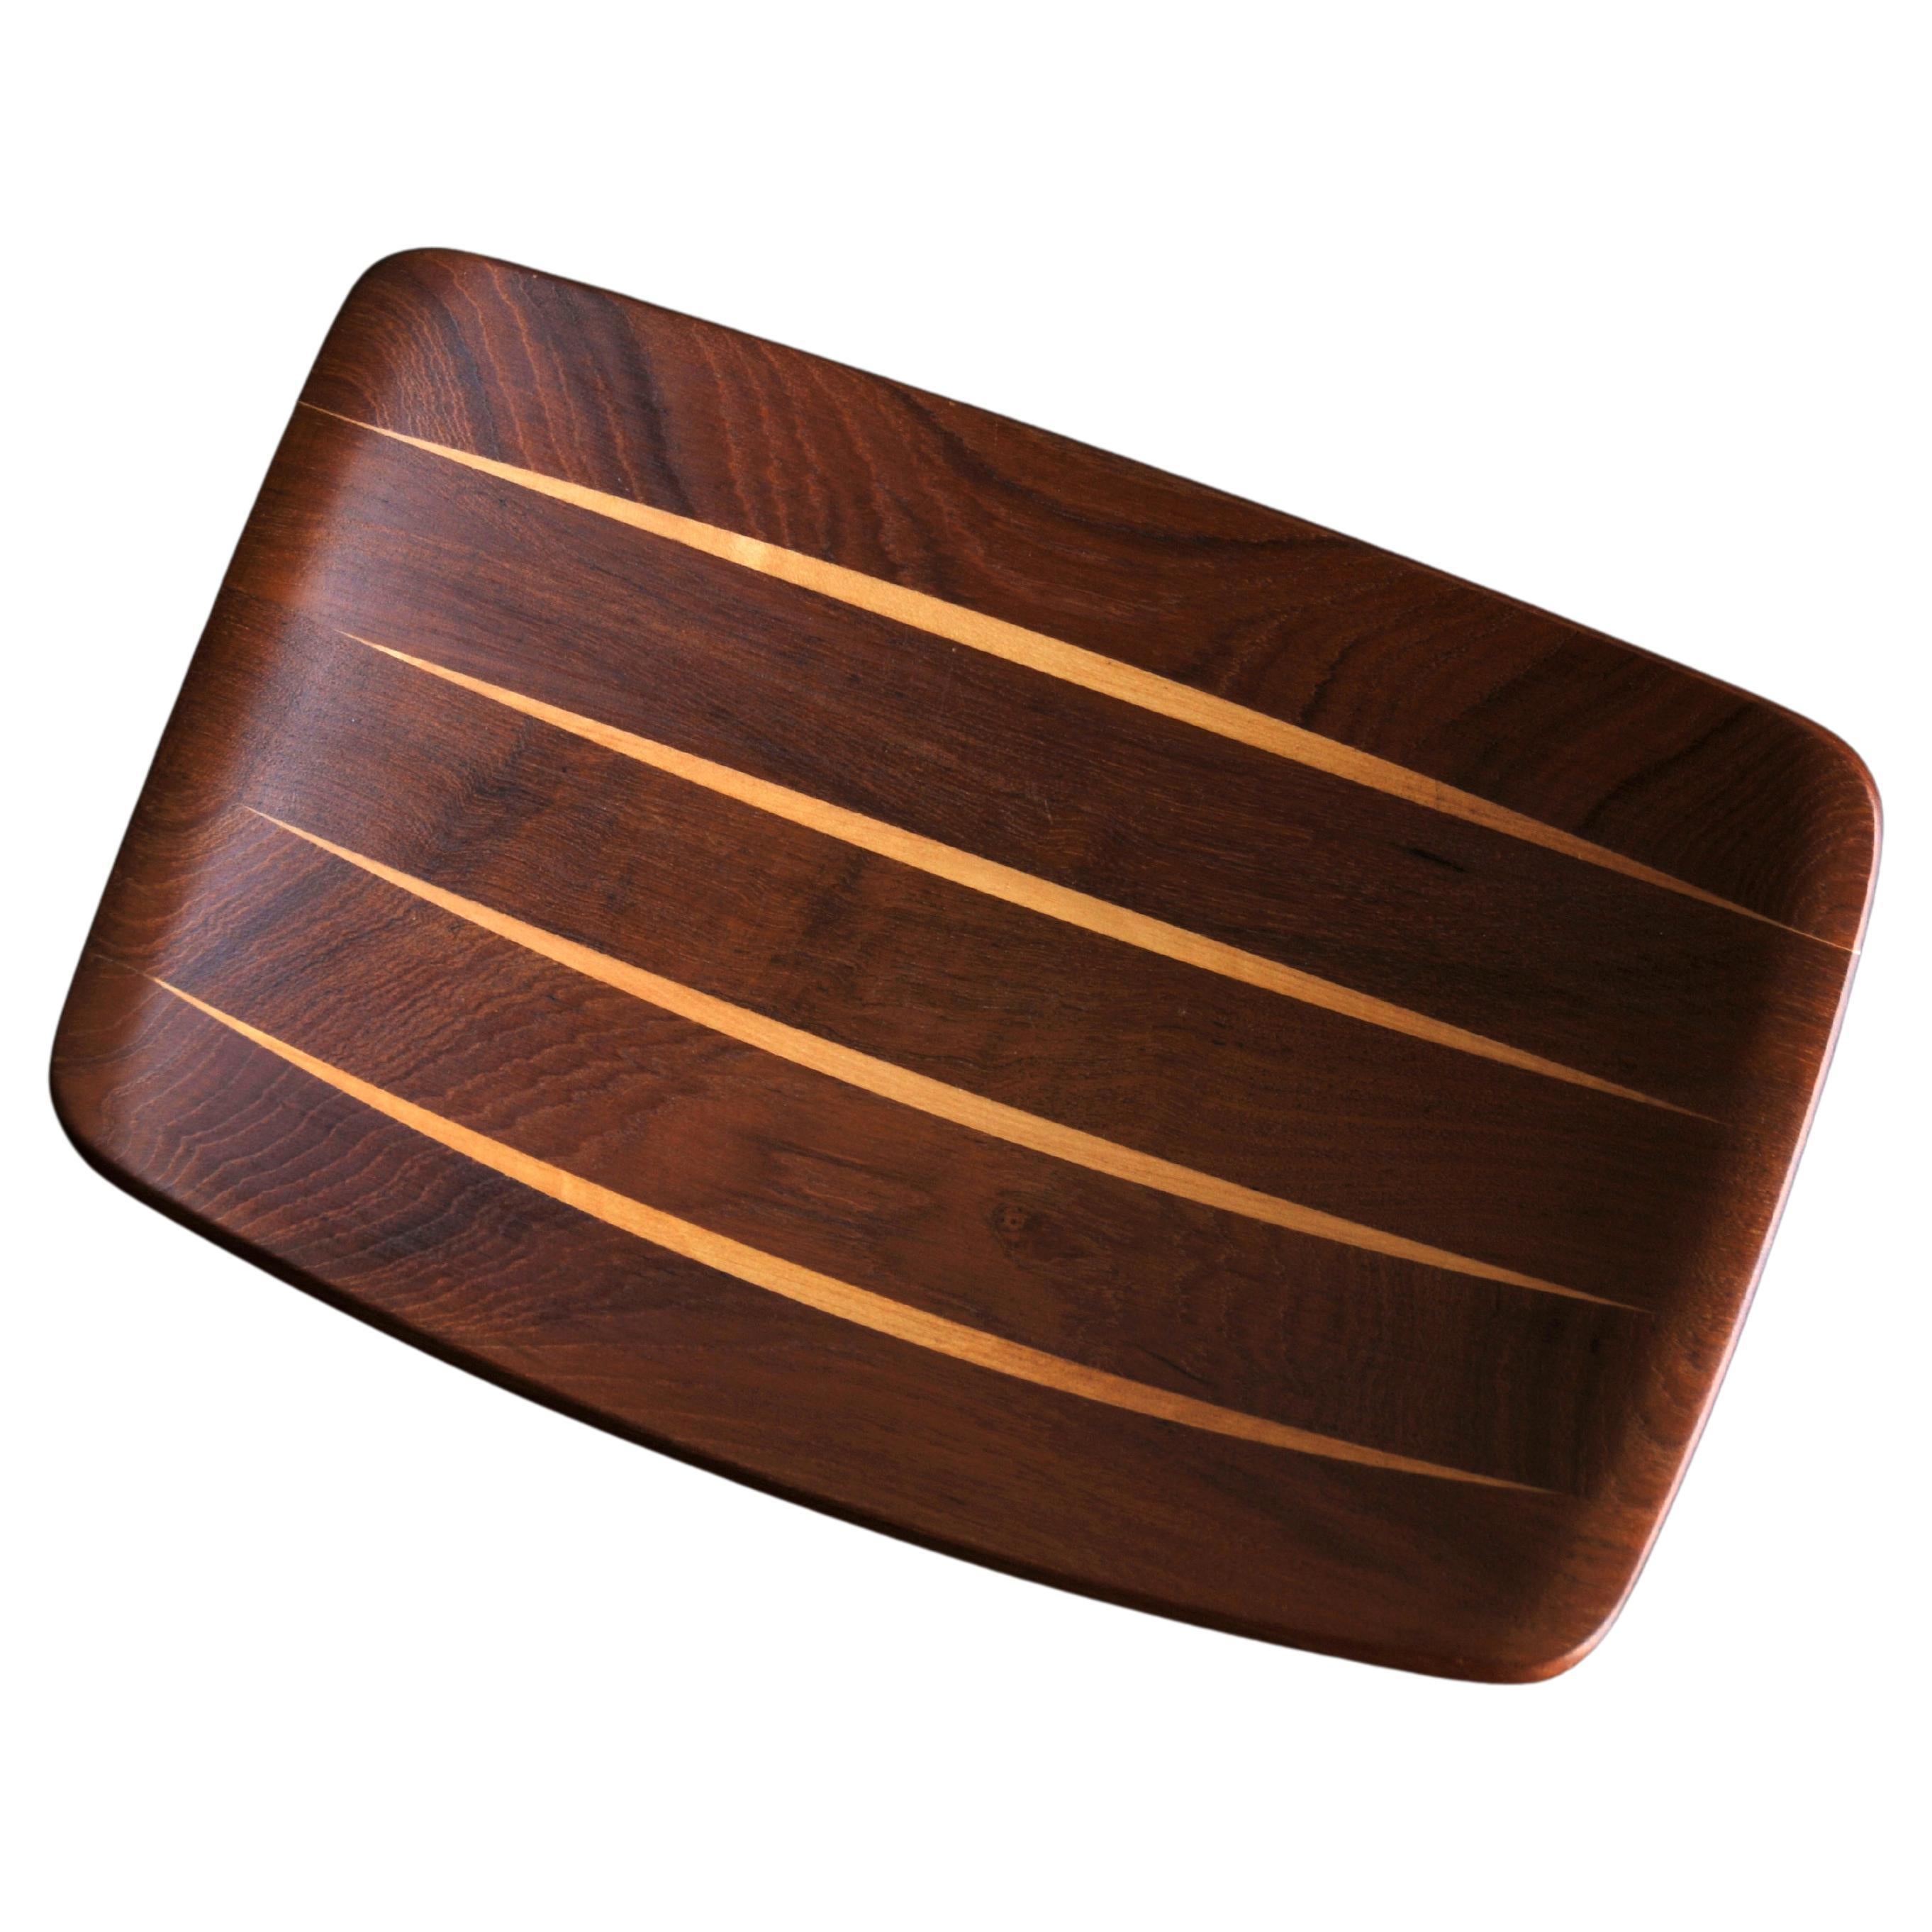 Teak tray with birch details by Arne Tidemand Ruud For Sale